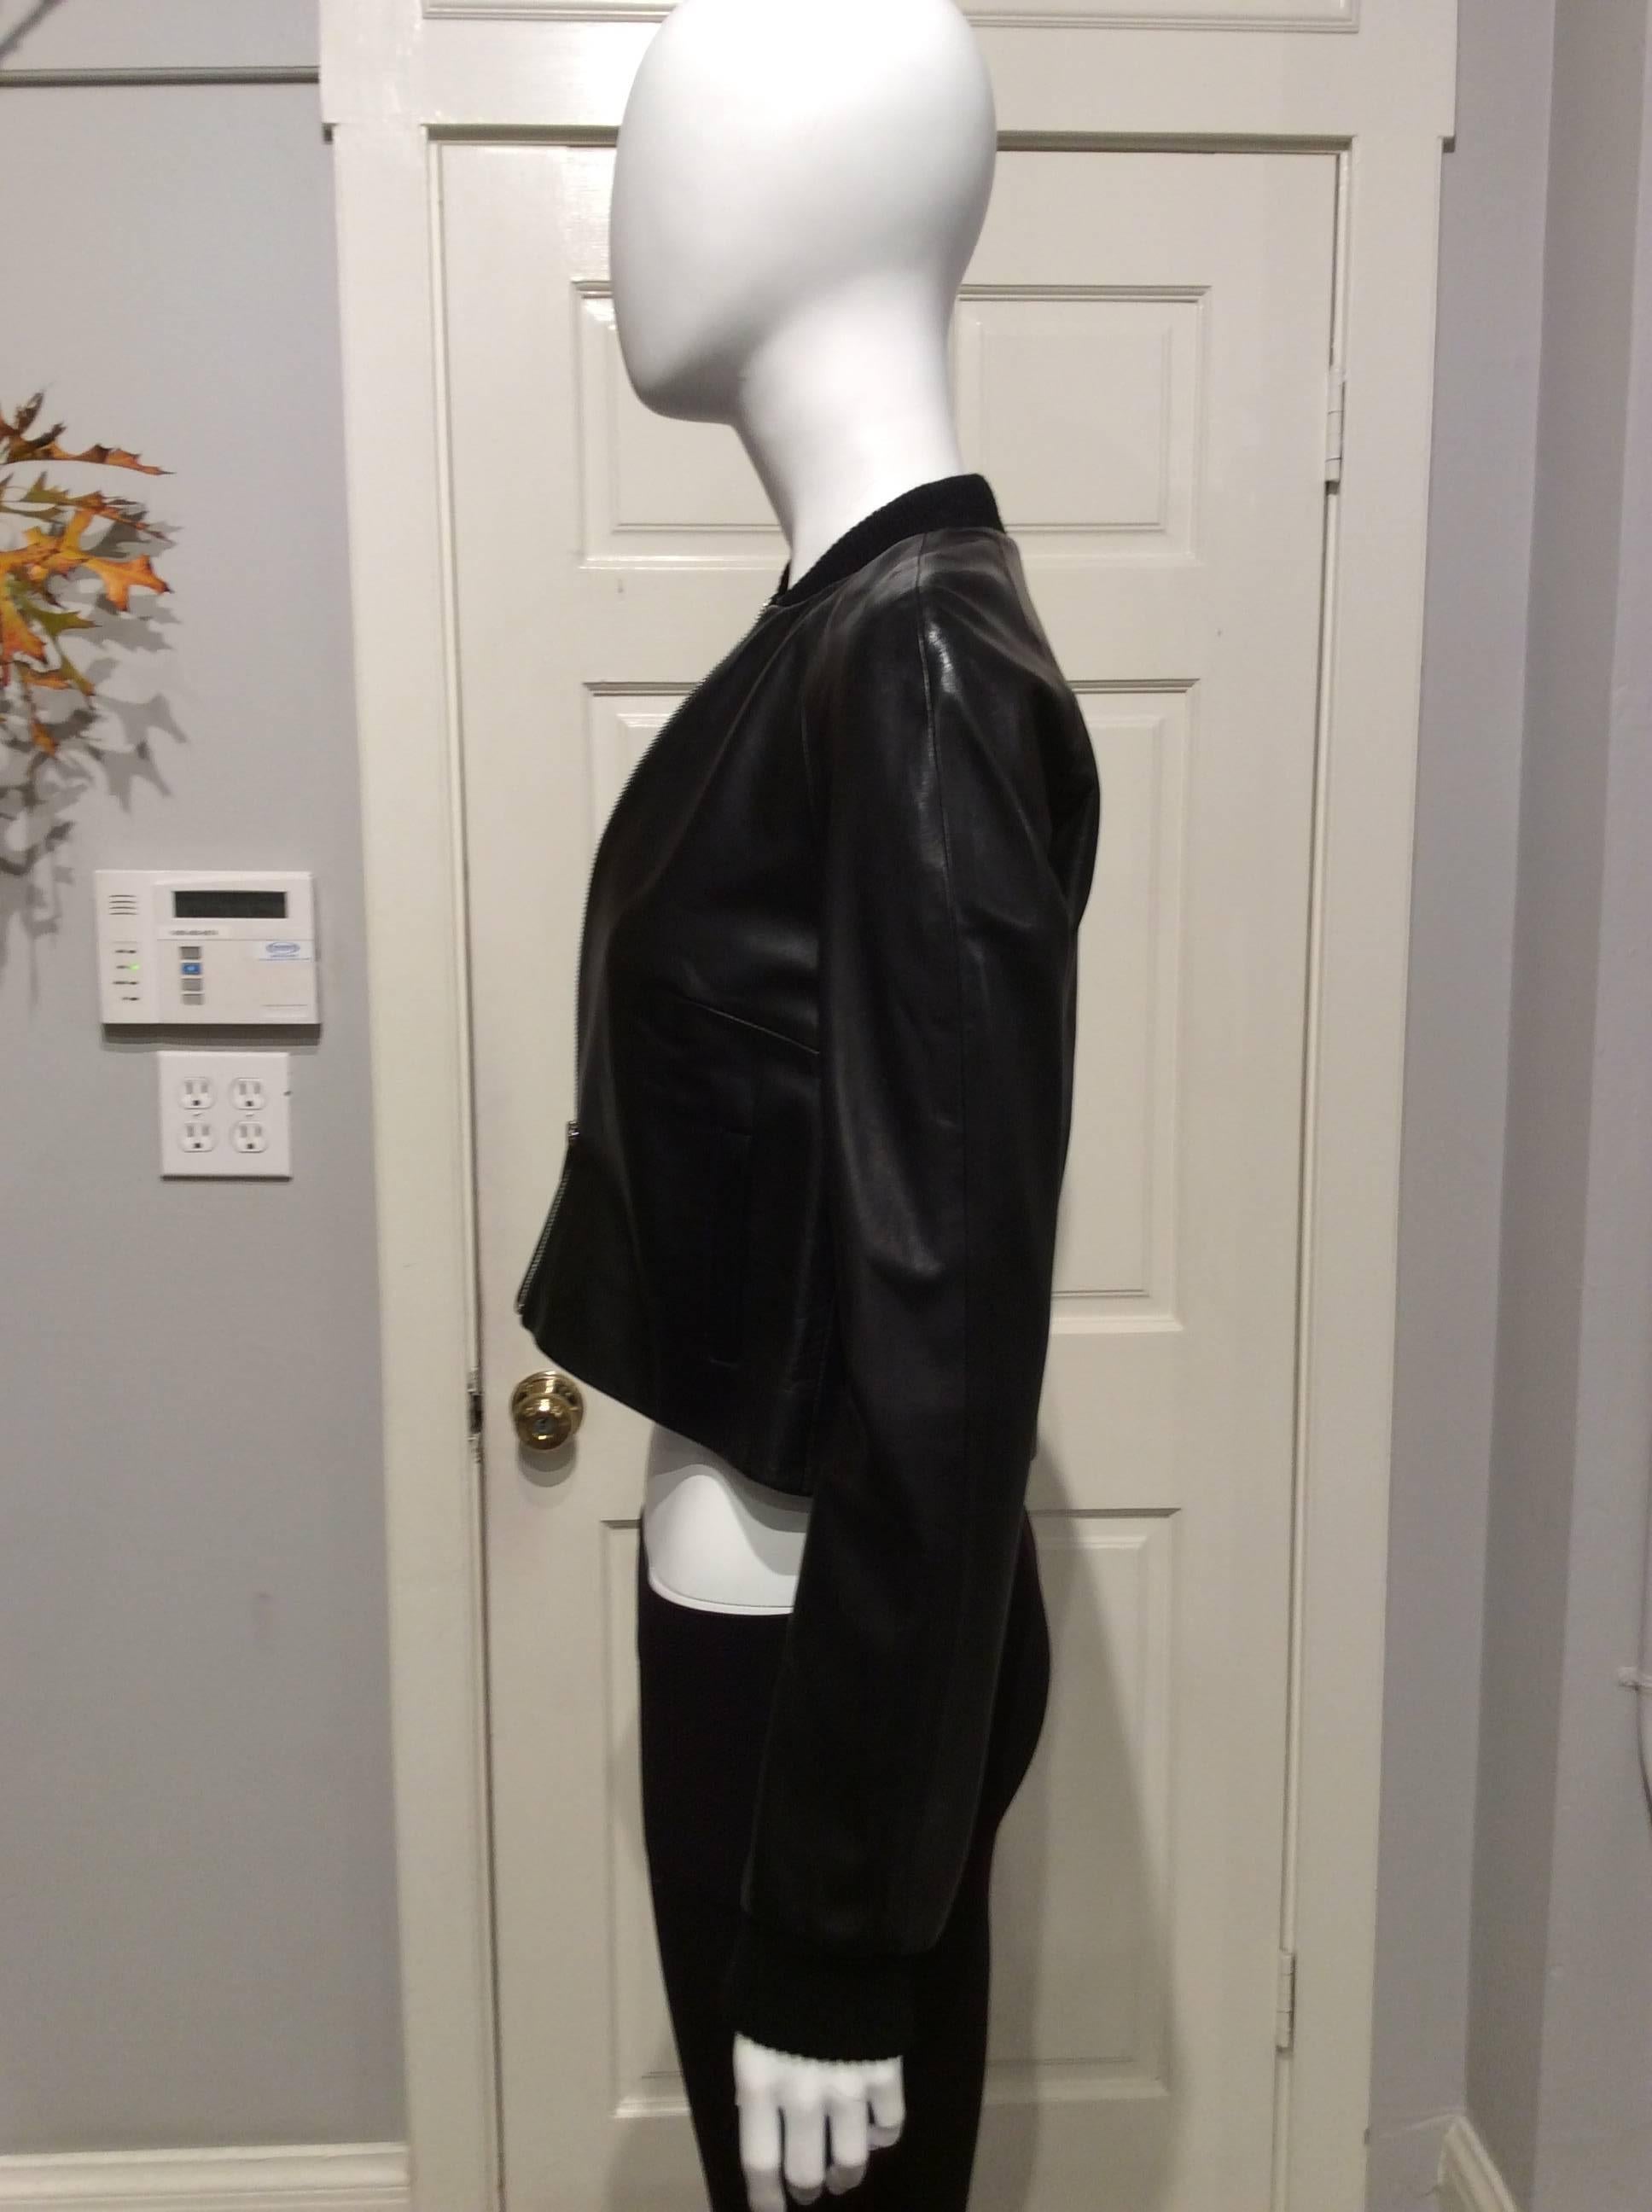 Black Christopher Kane bomber jacket in the softest leather. It has knitted cuffs and collar, two 4in long slit pockets, and it closes with a silver colored metal zipper.
The item is brand new with tag.